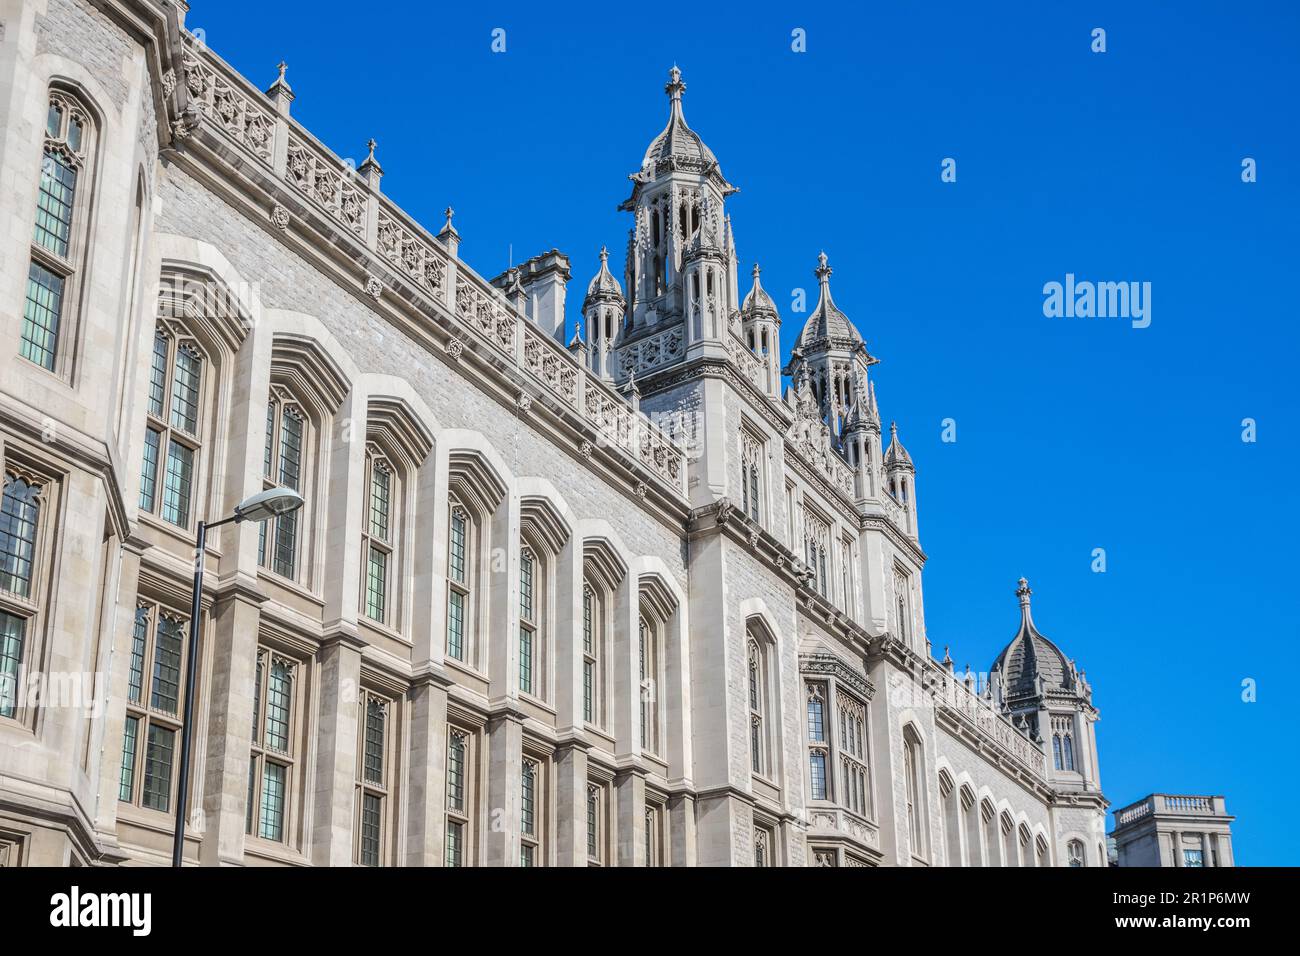 Fassade der Maughan Library of King's College London Stockfoto